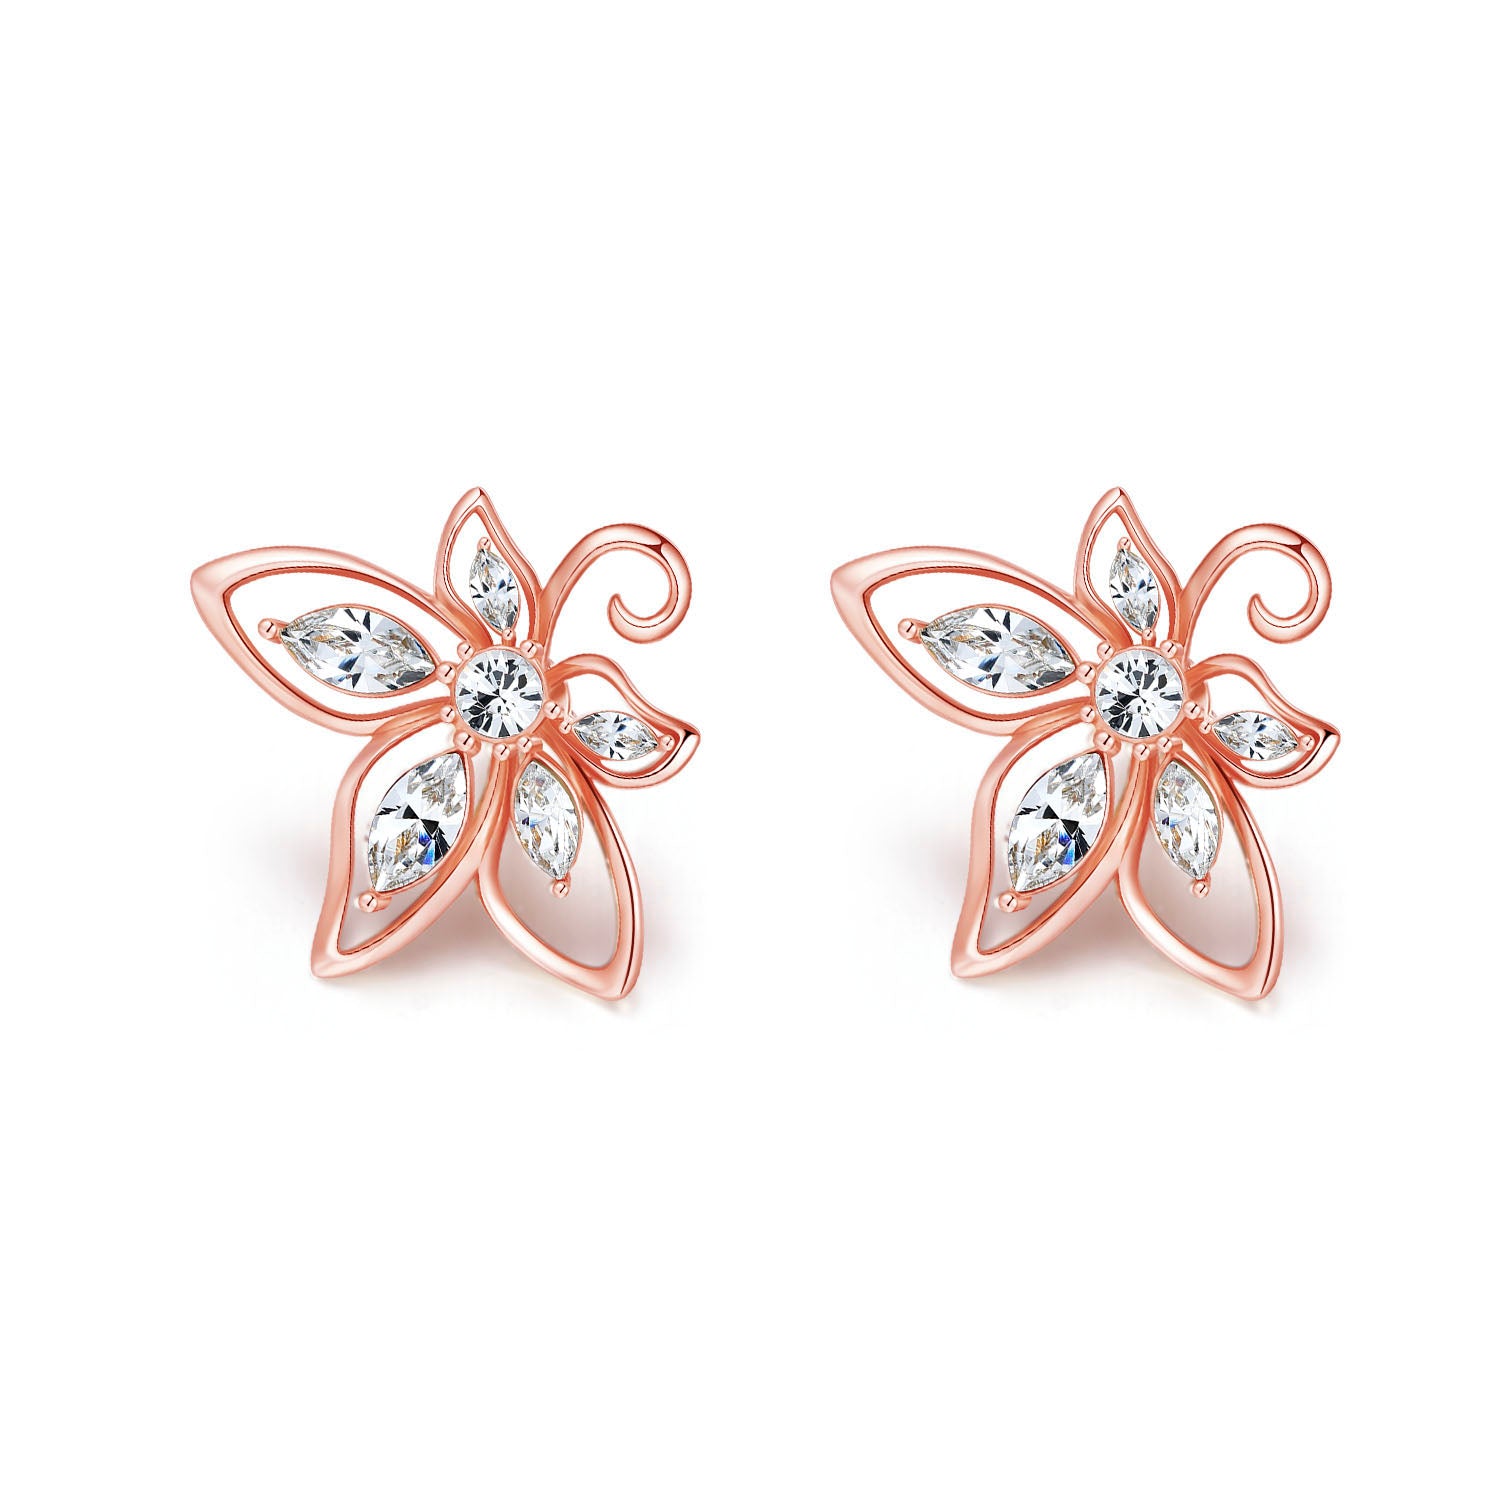 VICACCI 18K Rose Gold Bauhinia Earrings with Swarovski Clear Crystals